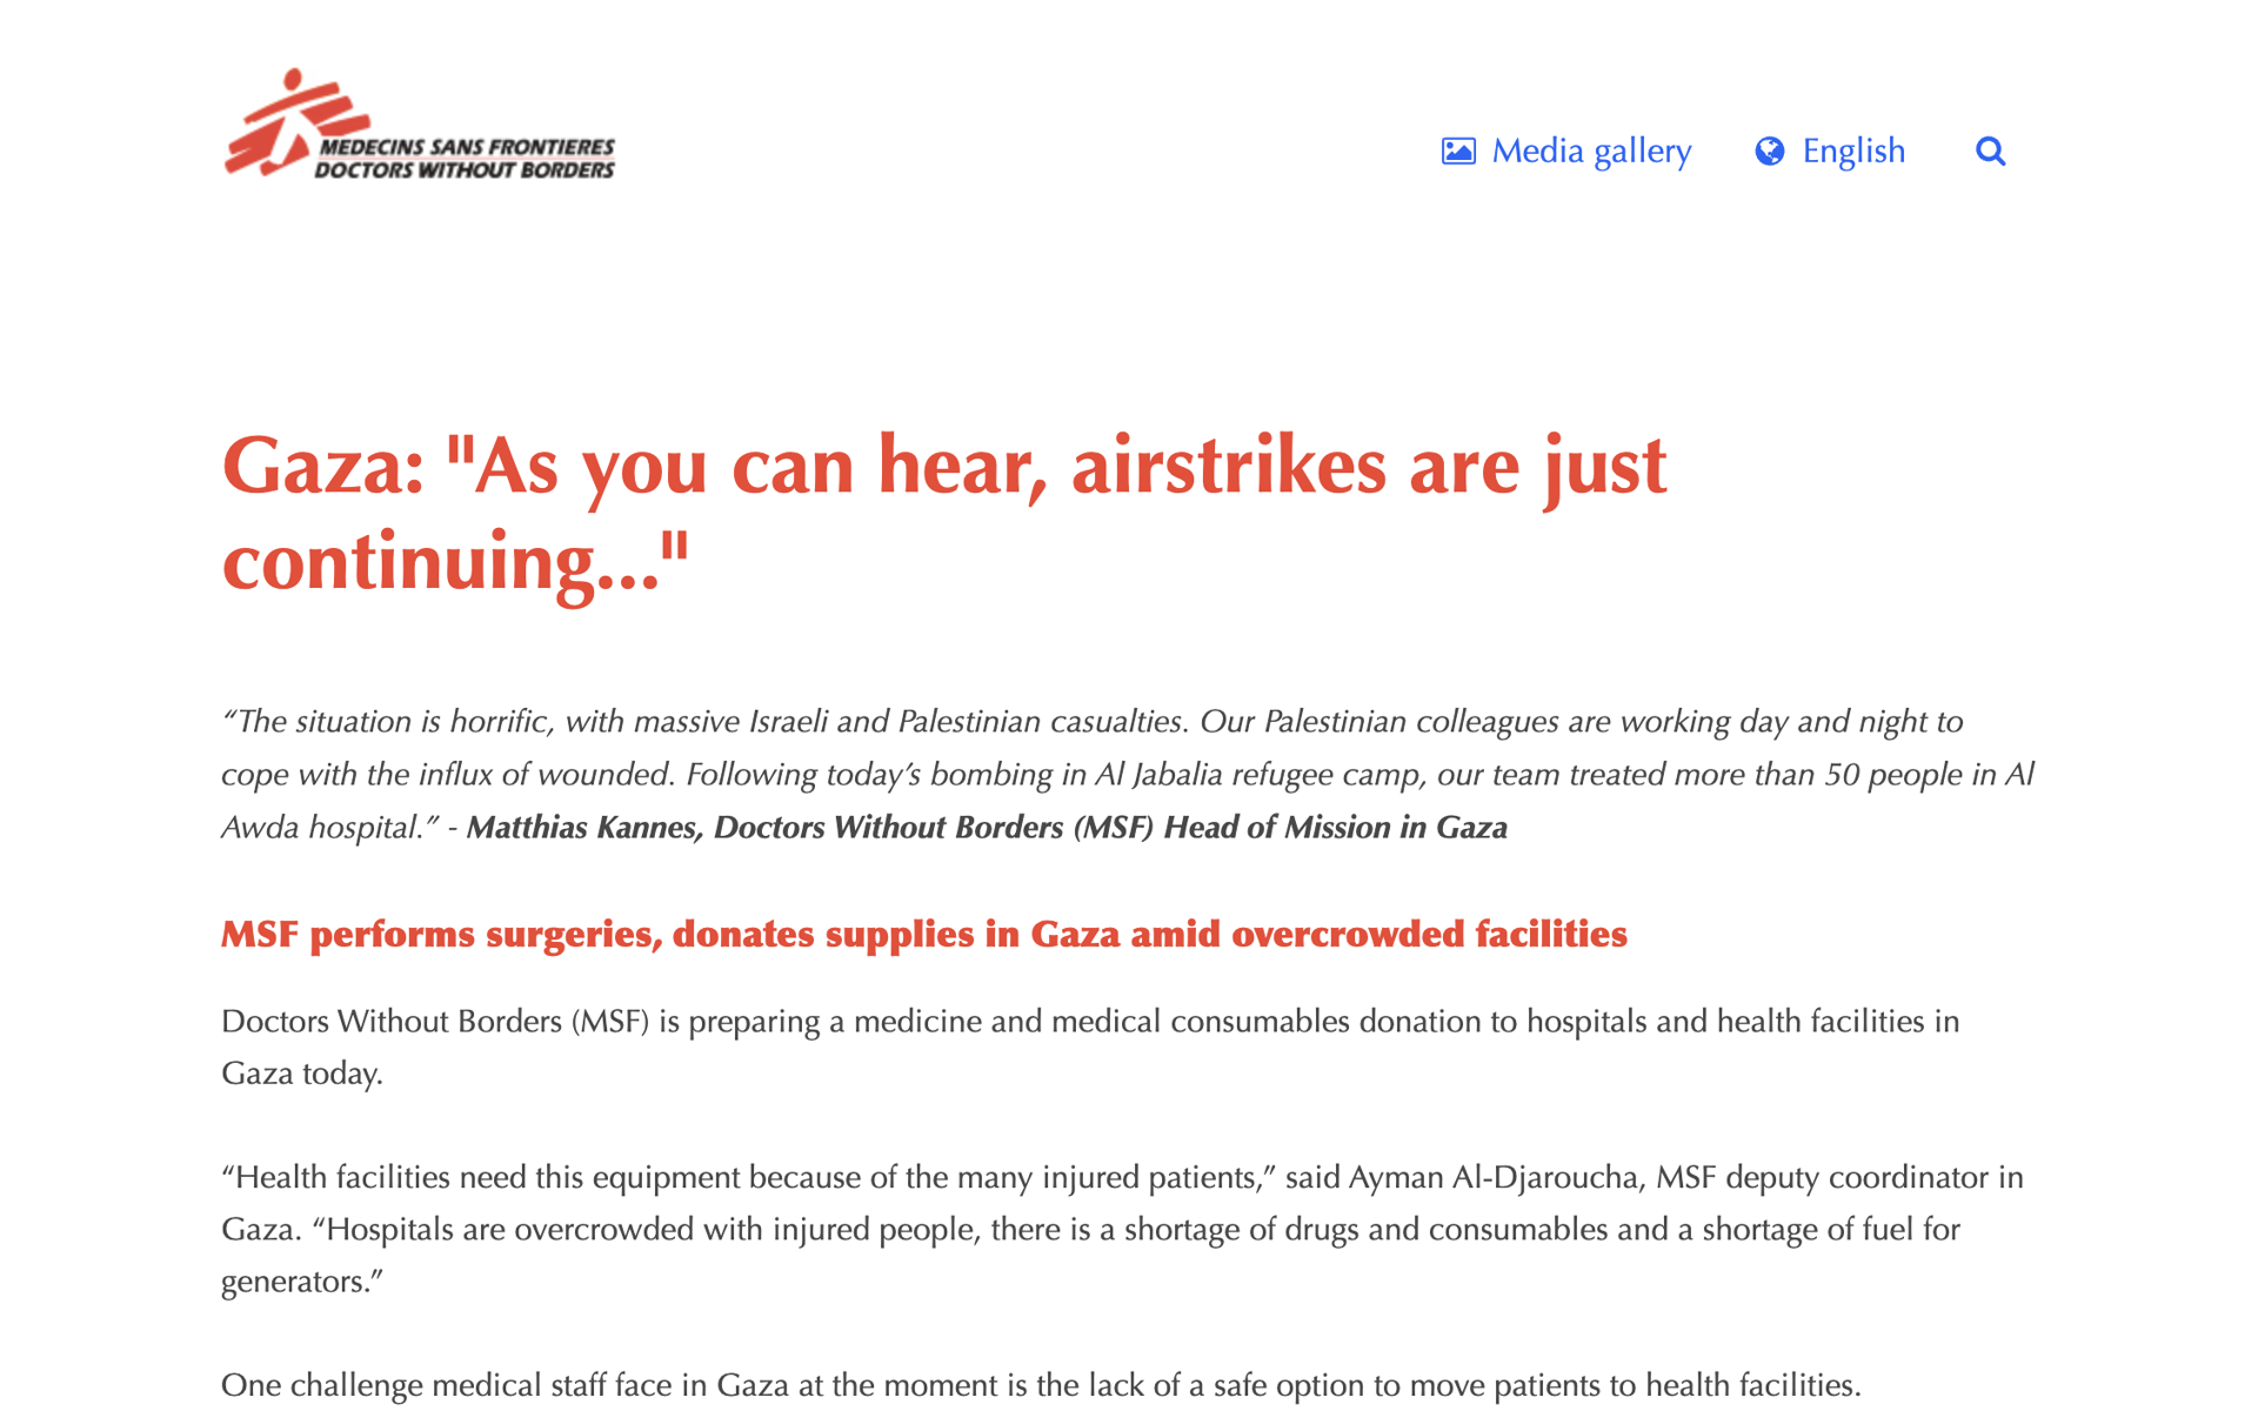 Gaza: "As you can hear, airstrikes are just continuing..."